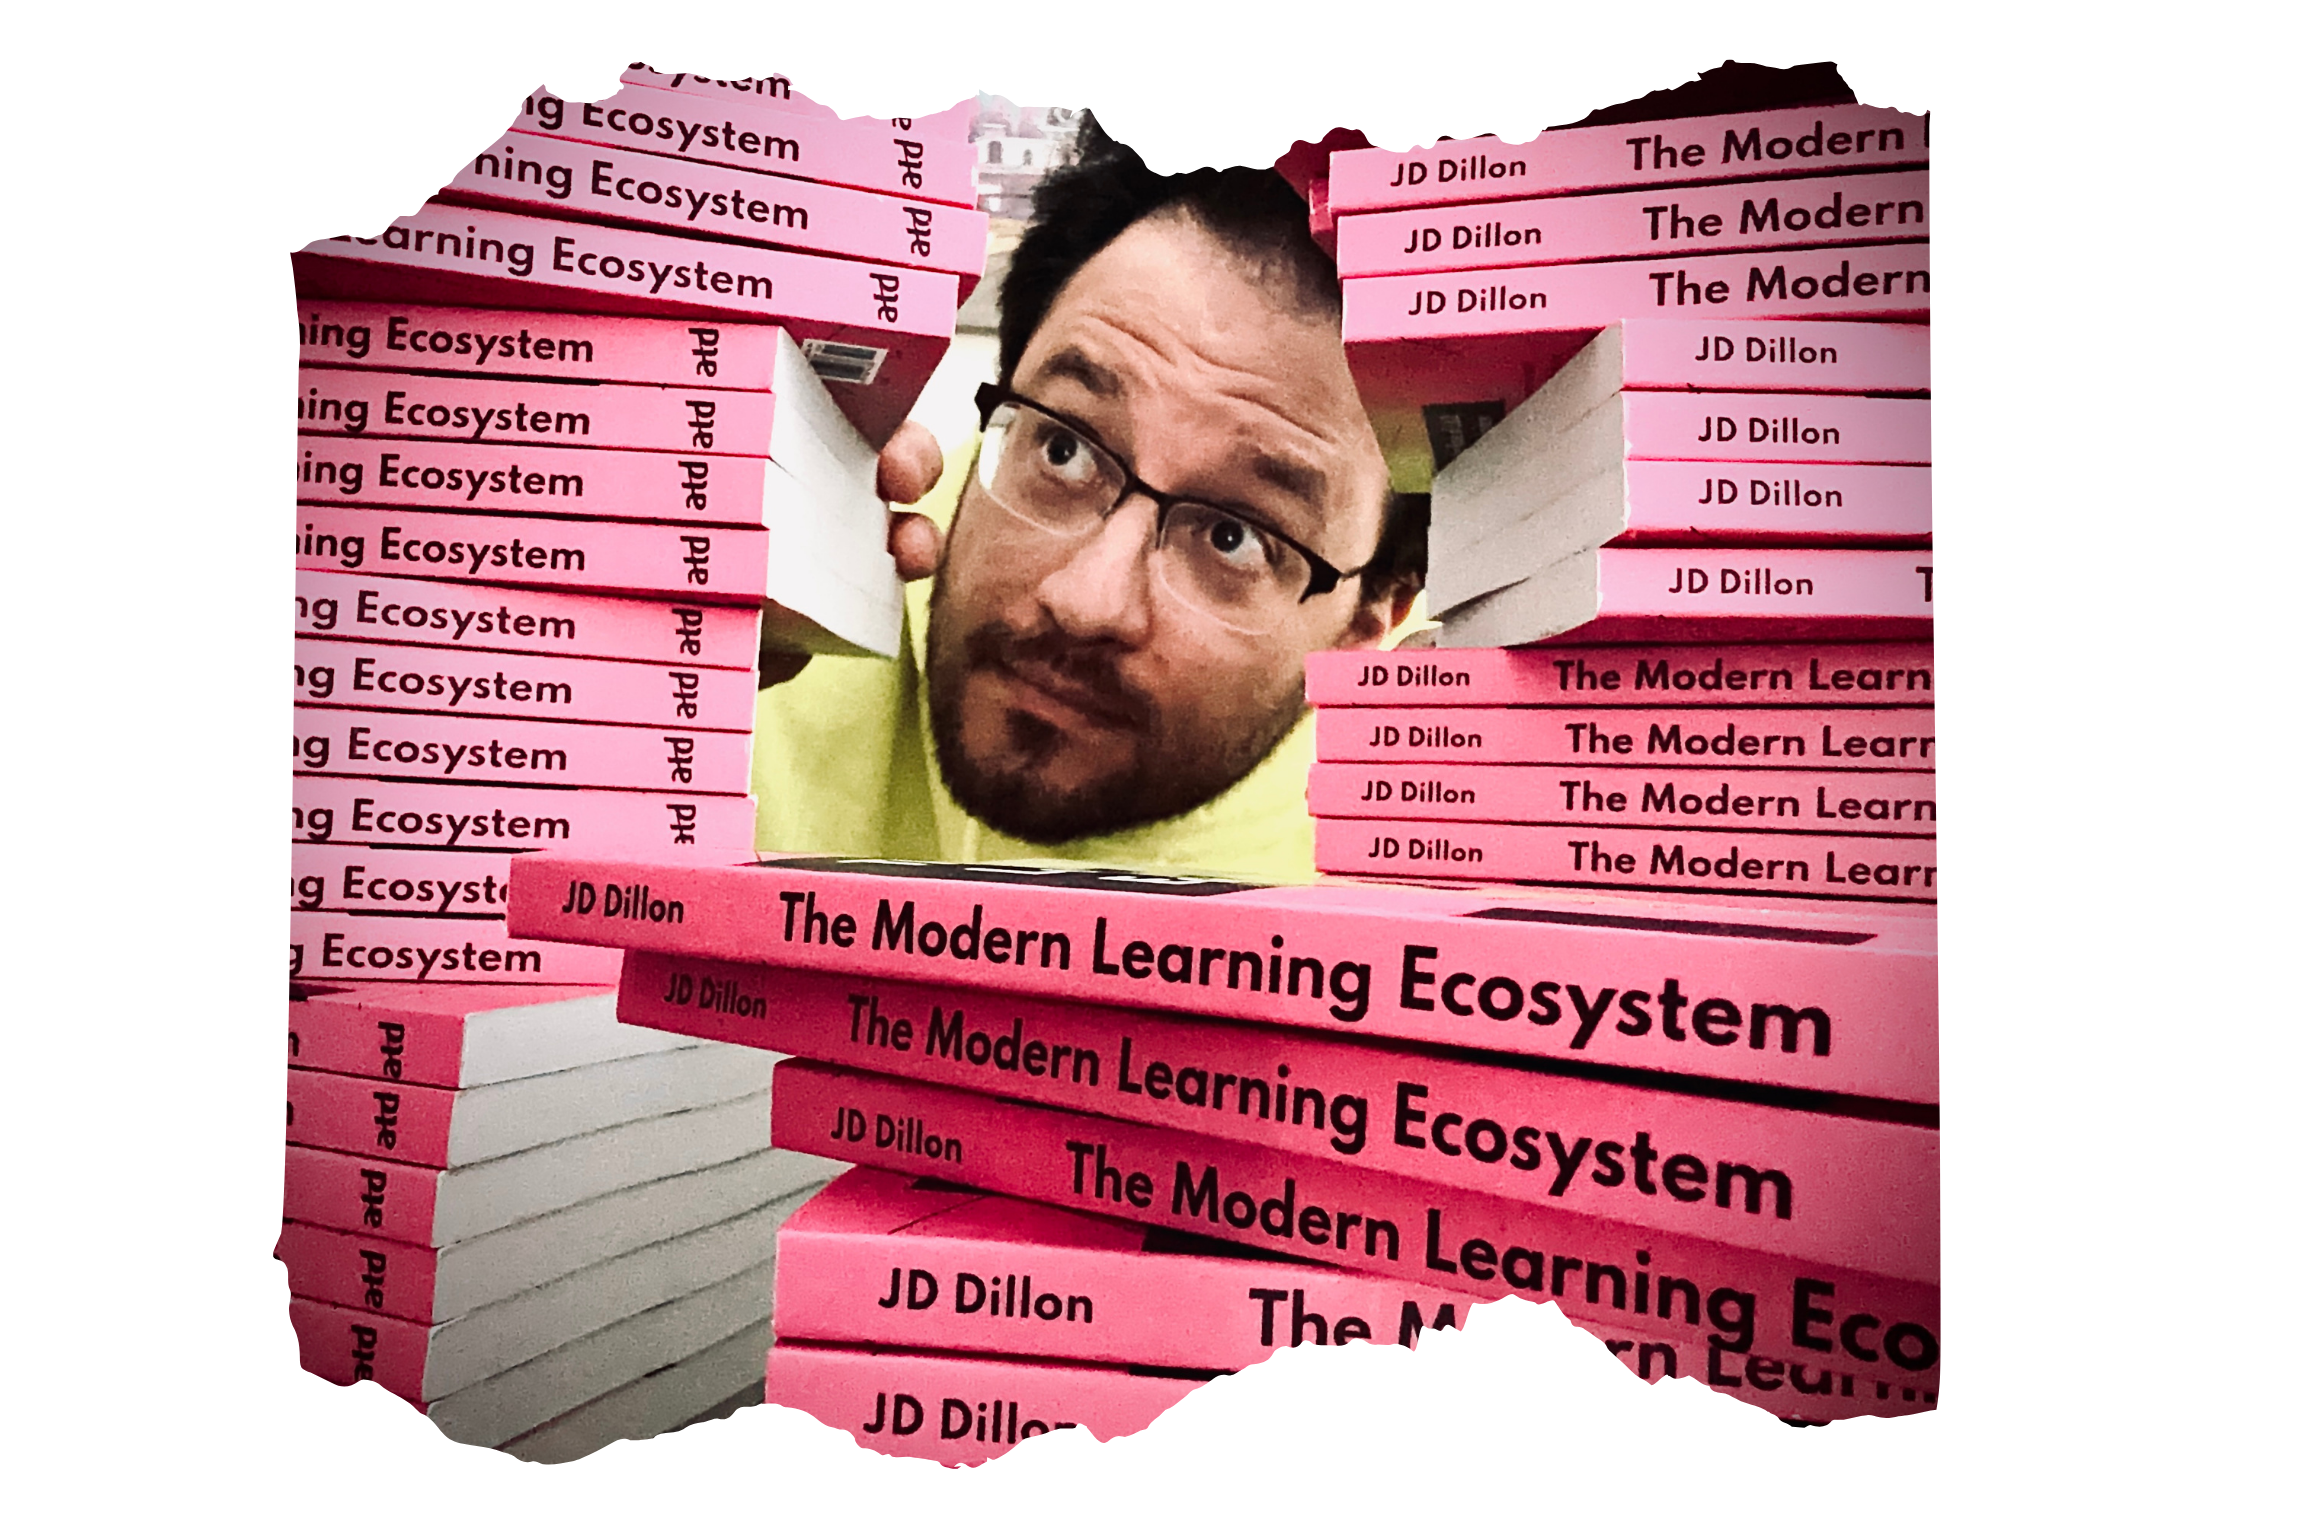 JD surrounded by copies of his book - The Modern Learning Ecosystem